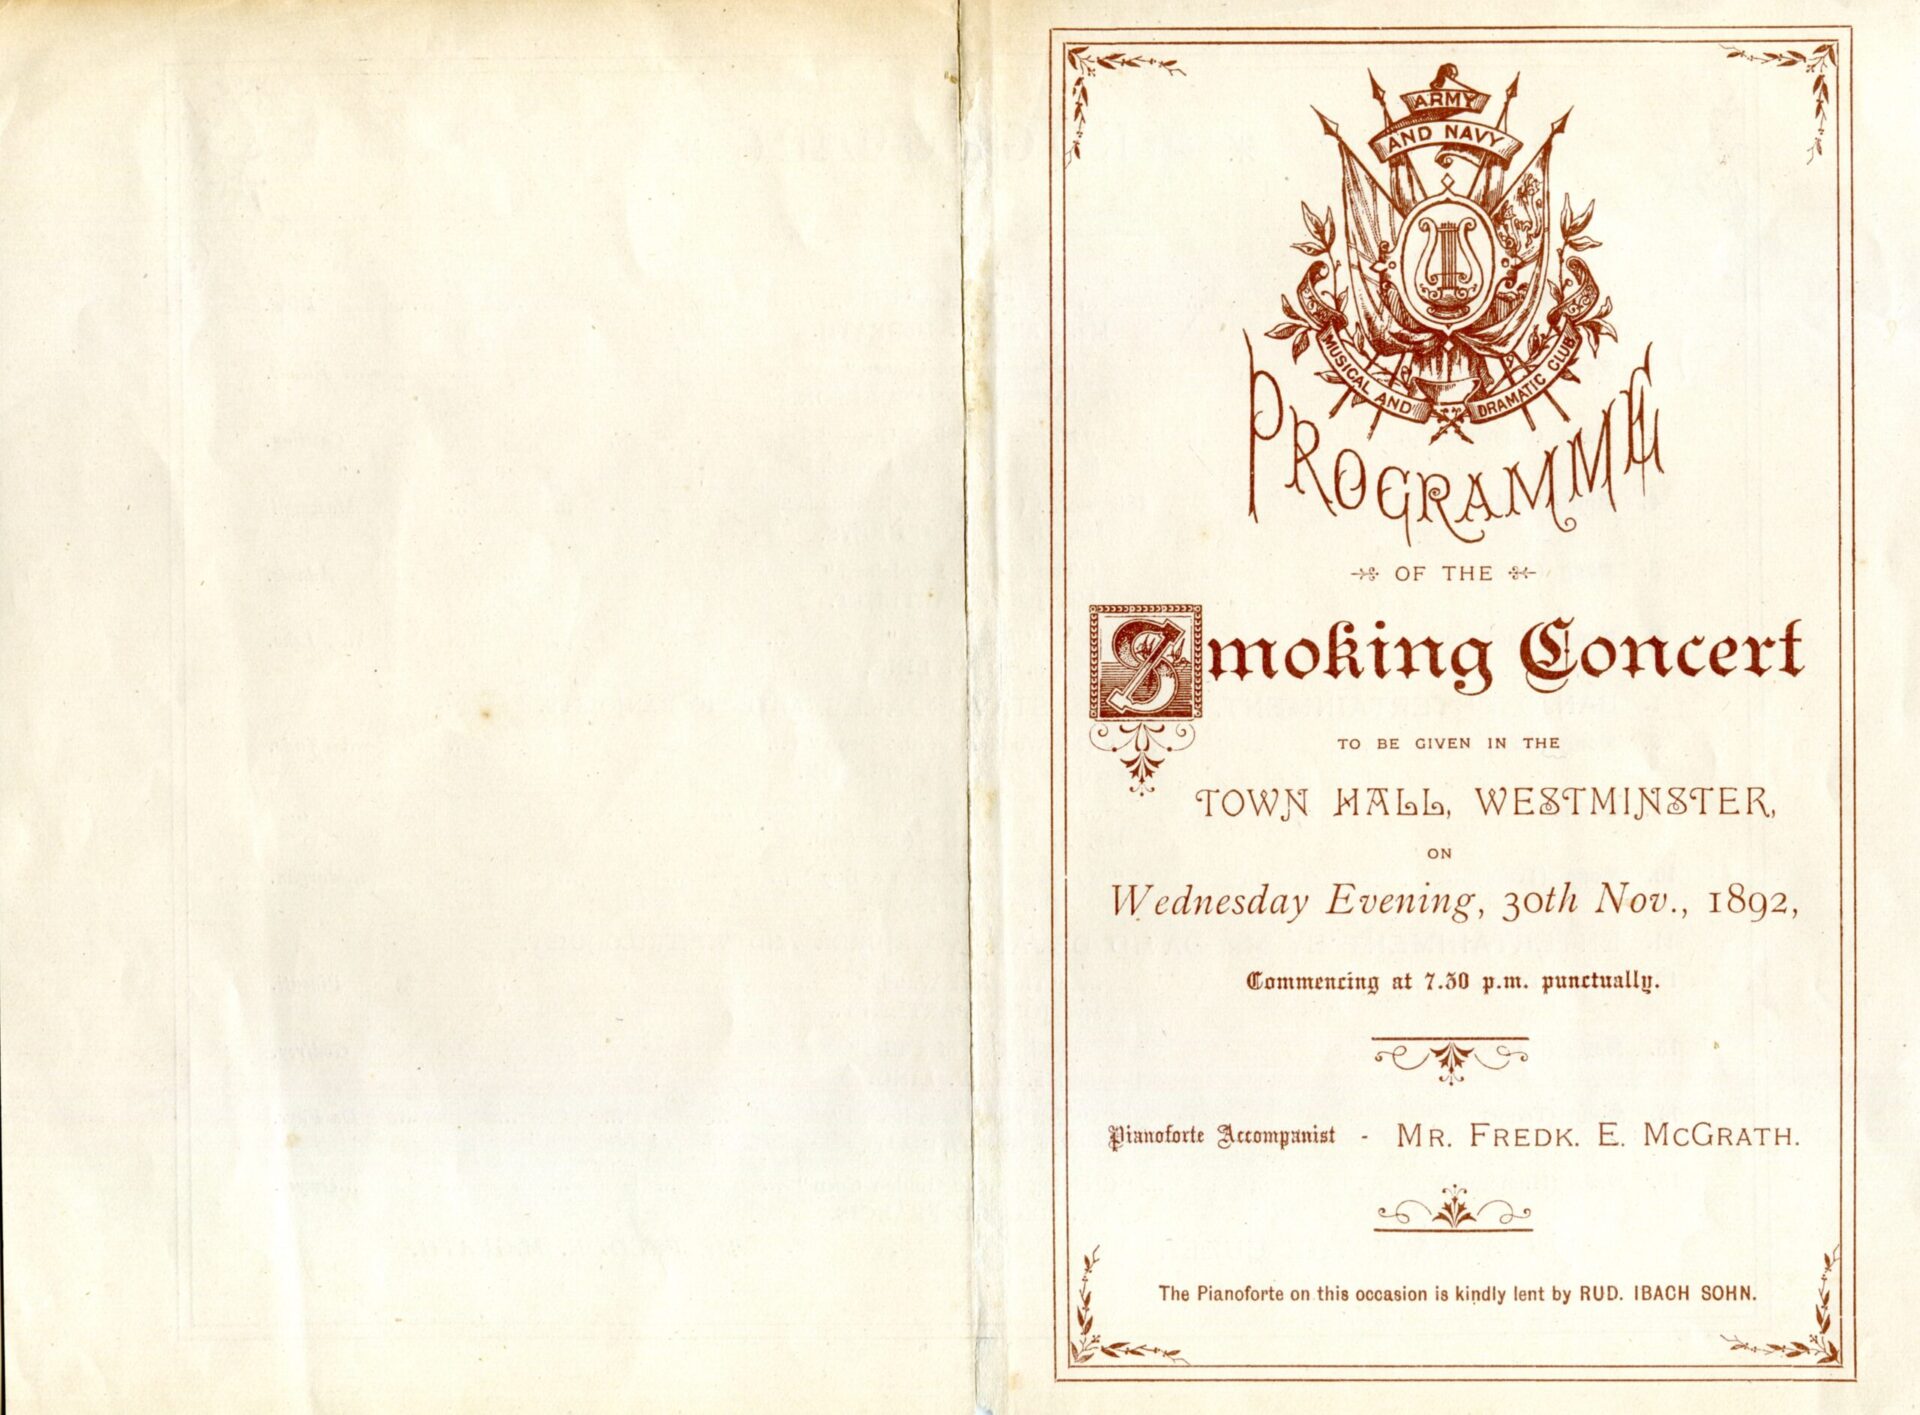 Programme for the Smoking Concert of the Army and Navy Musical Dramatic Club. Town Hall, Westminster. 30 November 1892